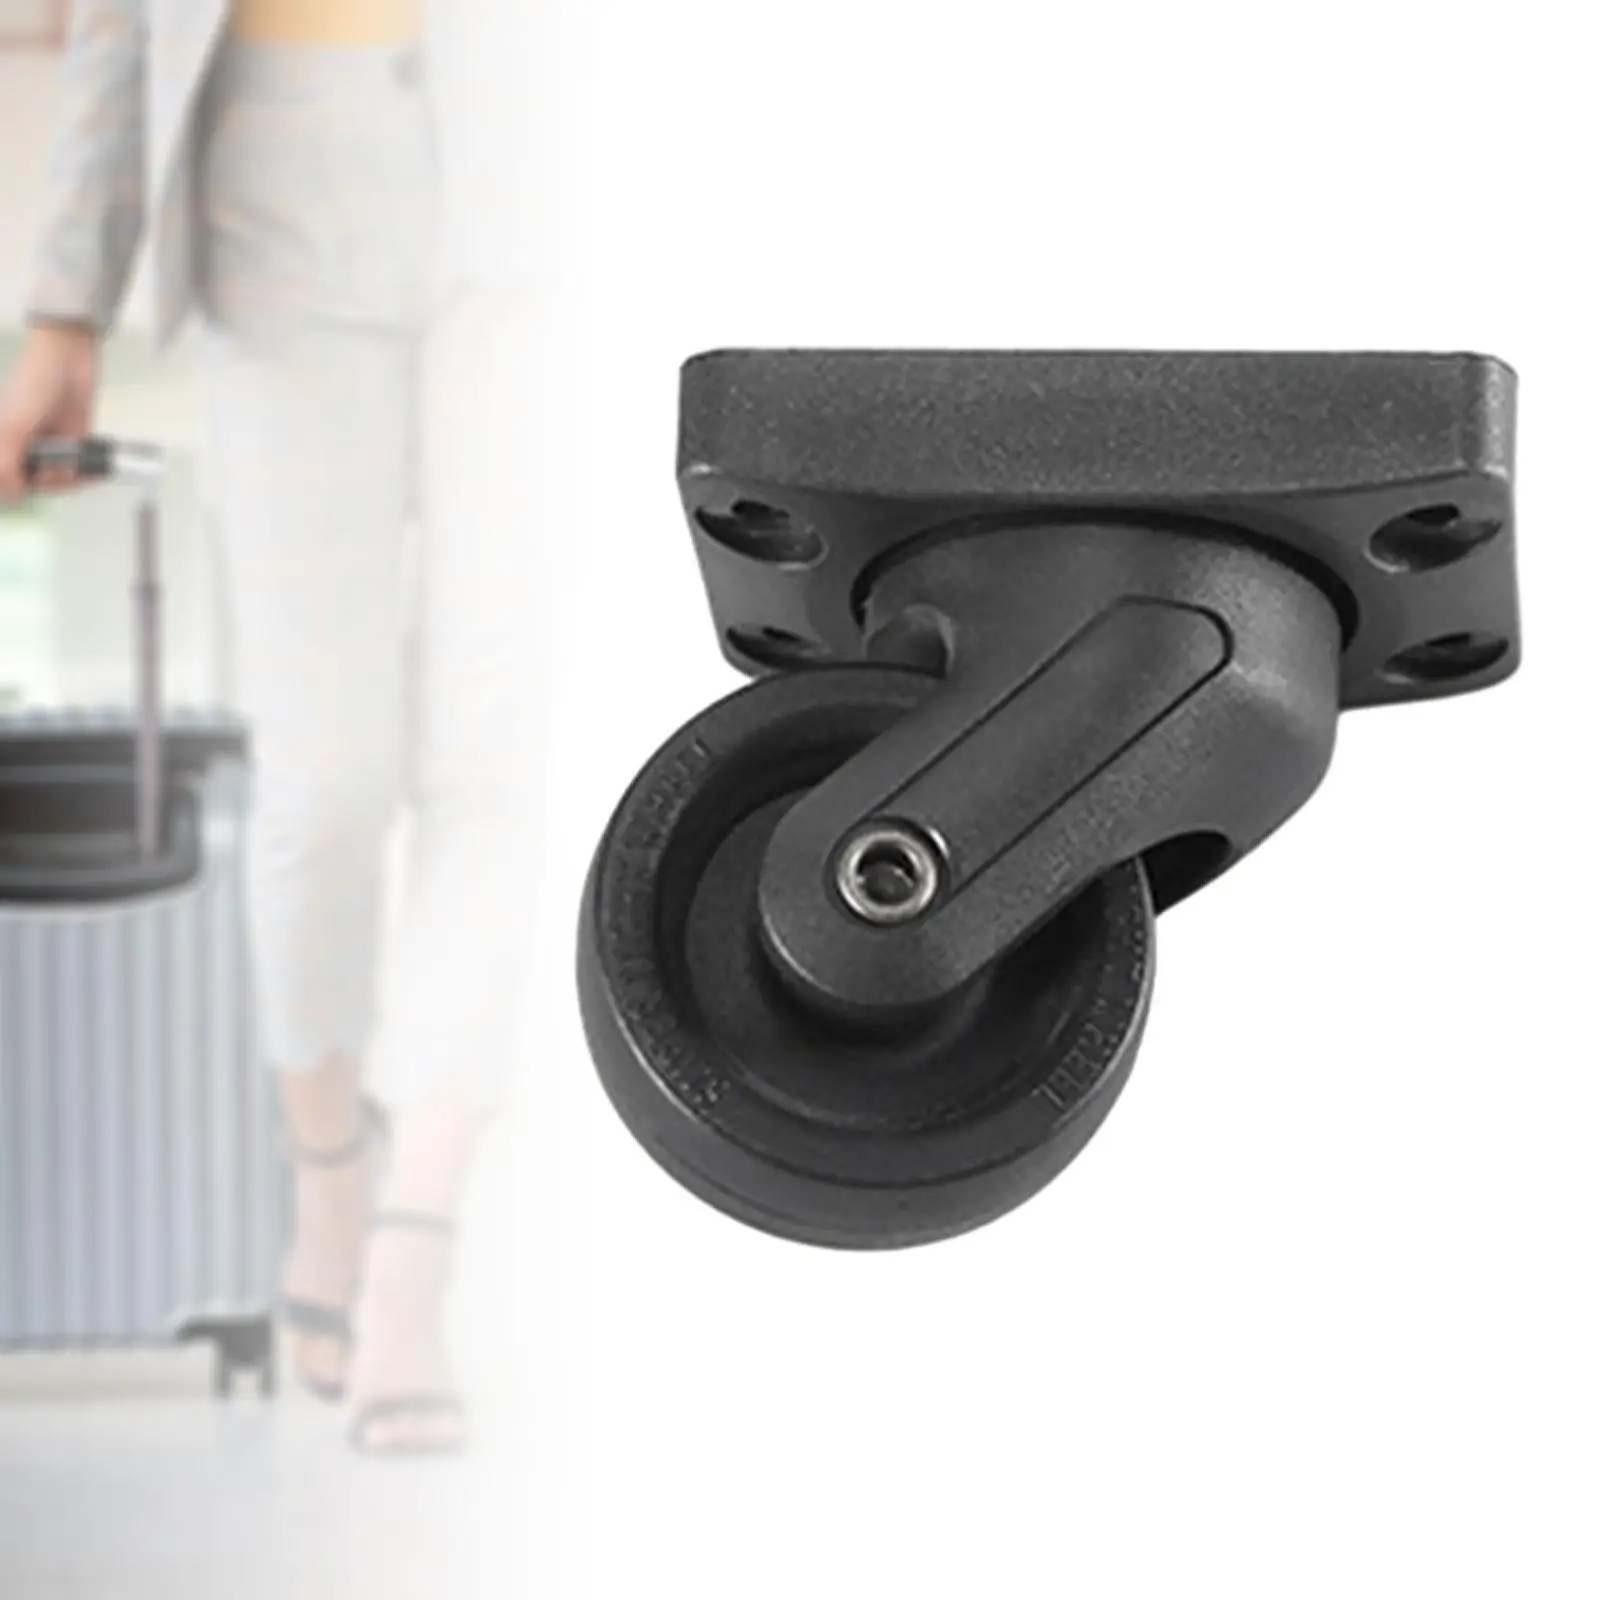 Luggage Replacement Wheels Repair Parts Luggage Accessories Portable Durable Case Wheels Luggage Casters Suitcase Swivel Wheels